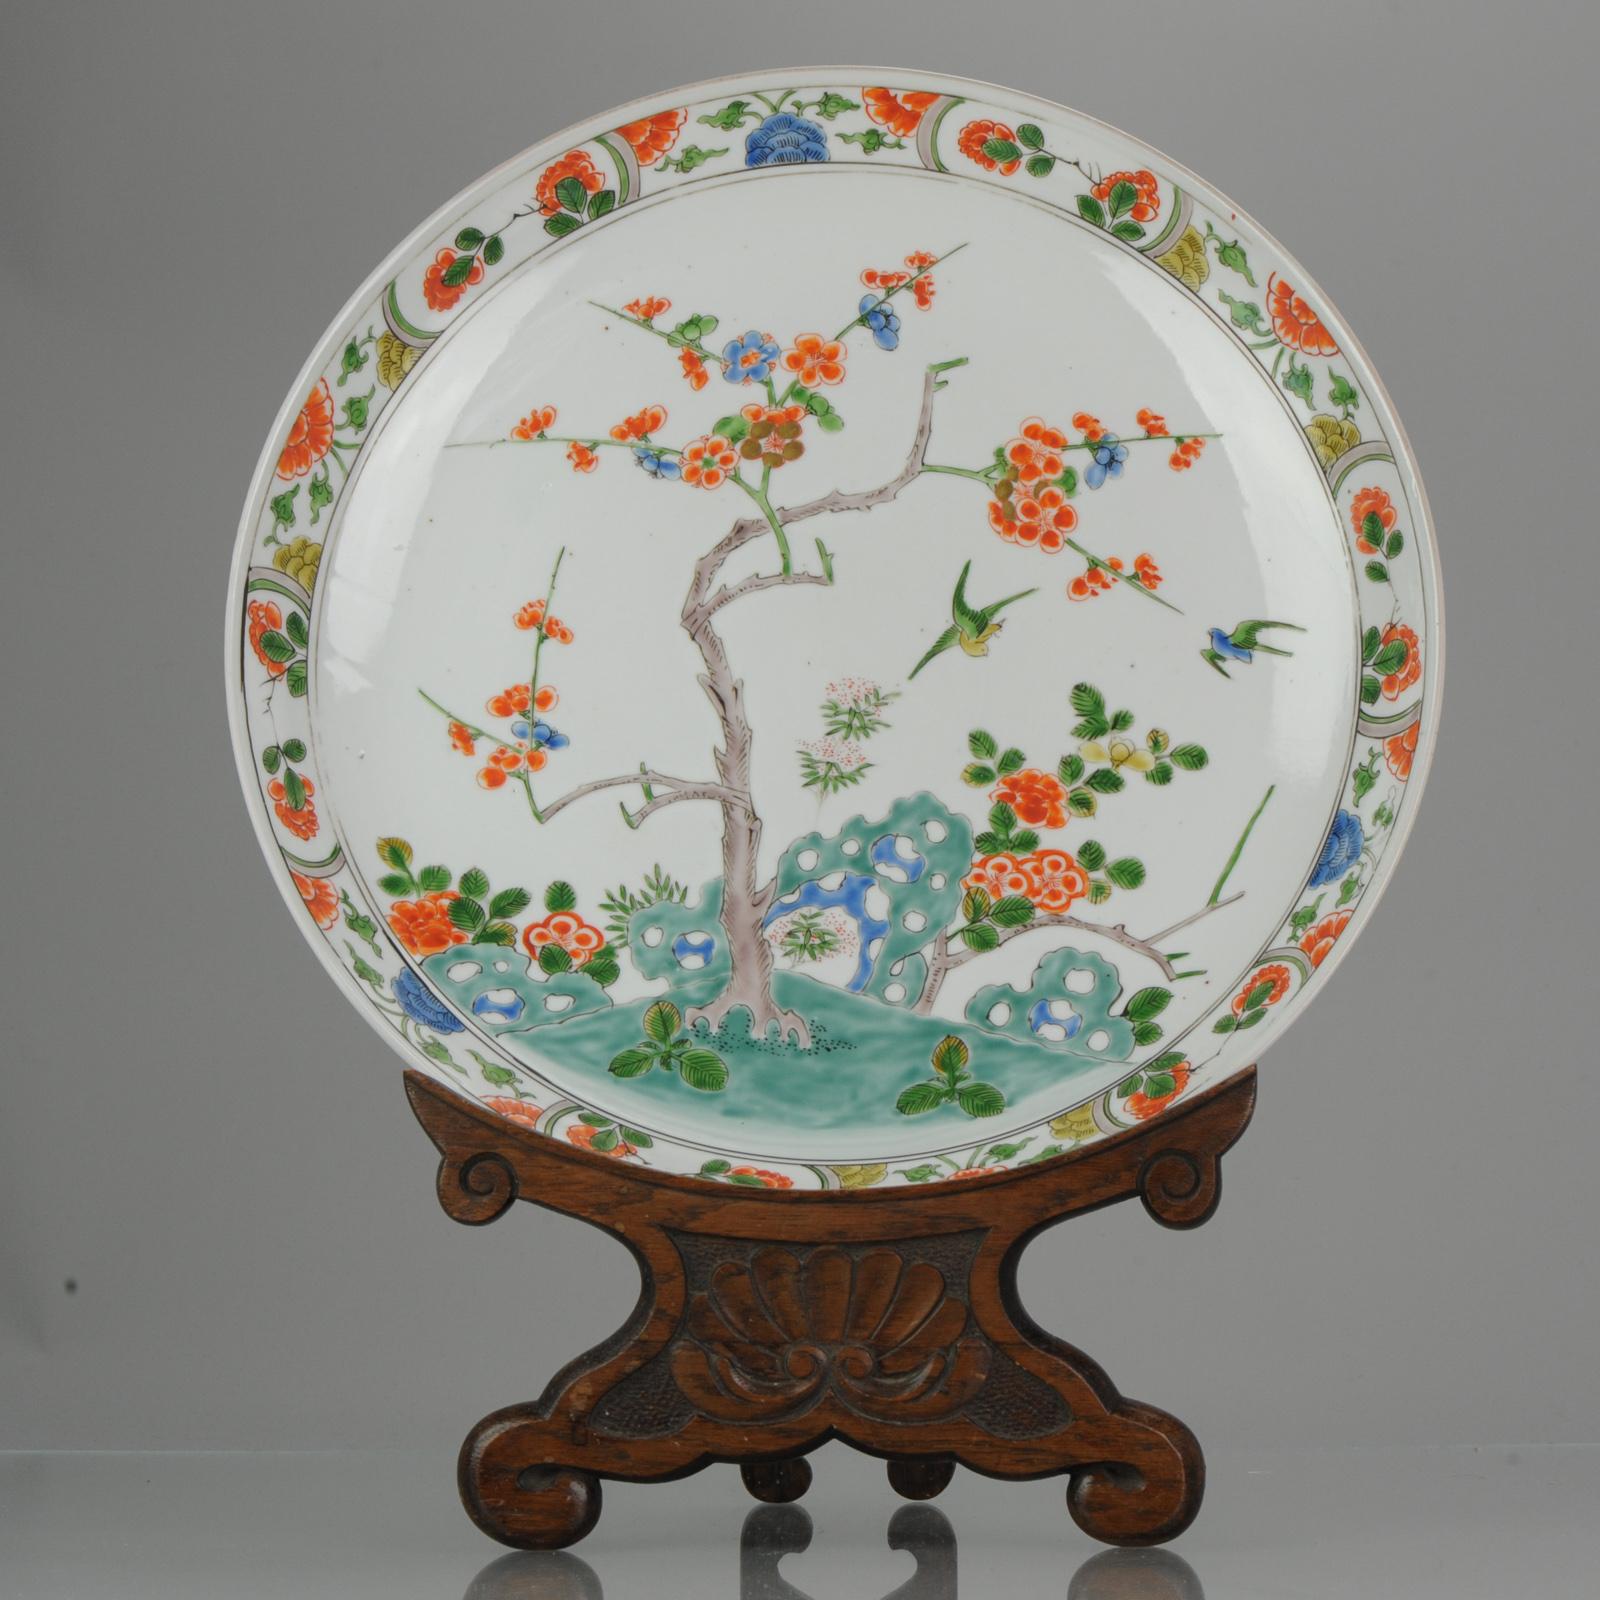 Kakiemon style large charger of Edo to early Meiji Period. Painted in the style of Early edo period Kakiemon dishes with the magpie birds and prunus trees.
The plate has two small drilled holes to the rim for hanging it up to a wall.
Condition is